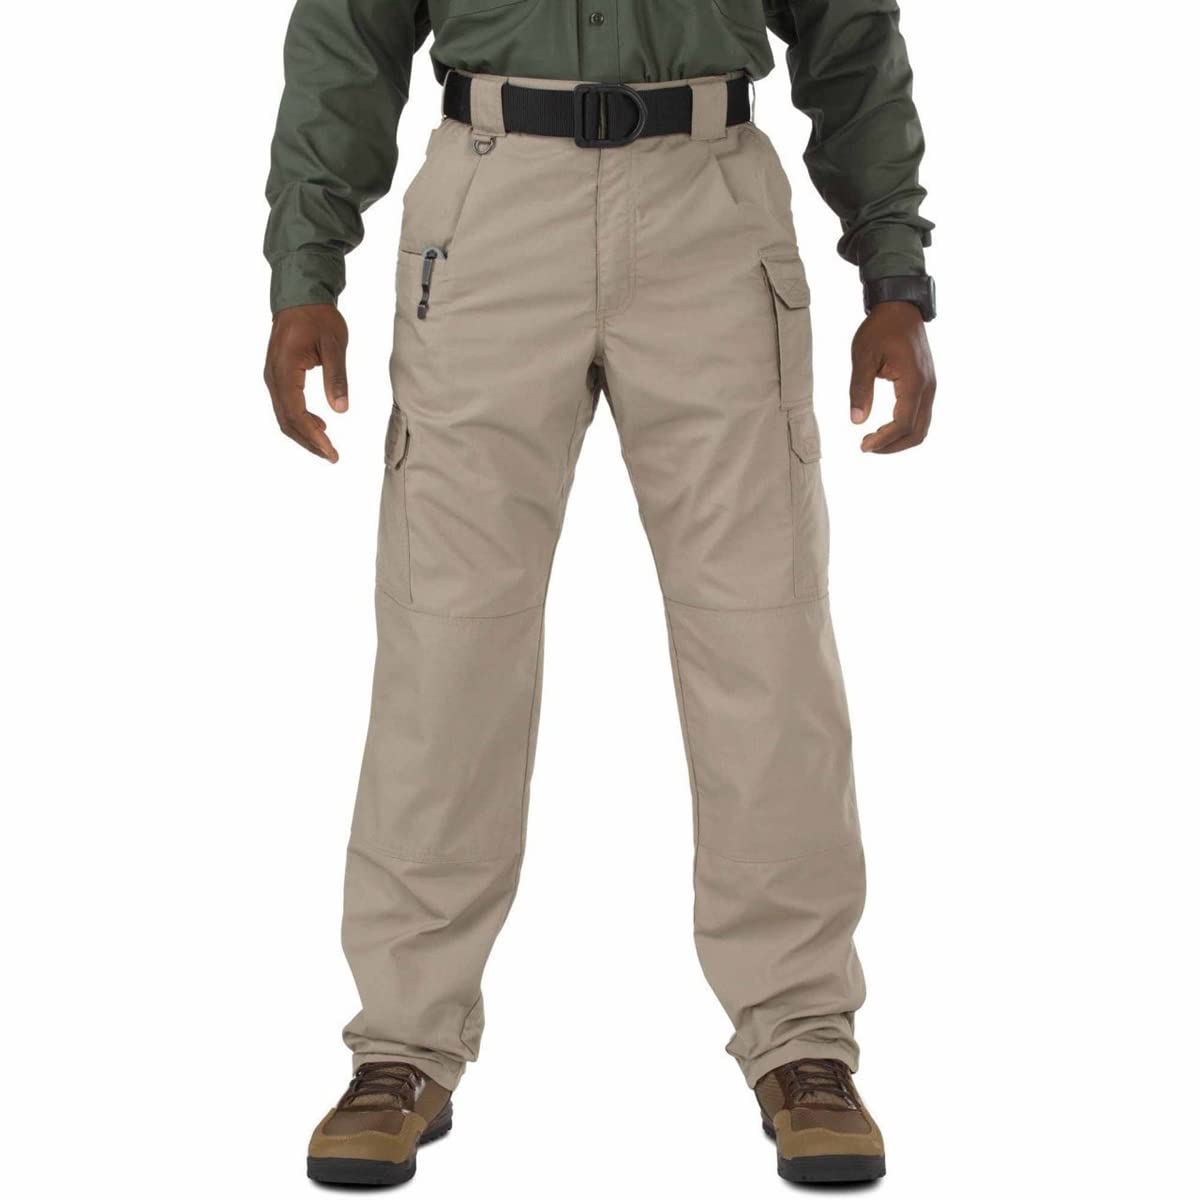 5.11 Tactical Men's Taclite Pro Lightweight Performance Pants, Cargo Pockets, Action Waistband, Style 74273